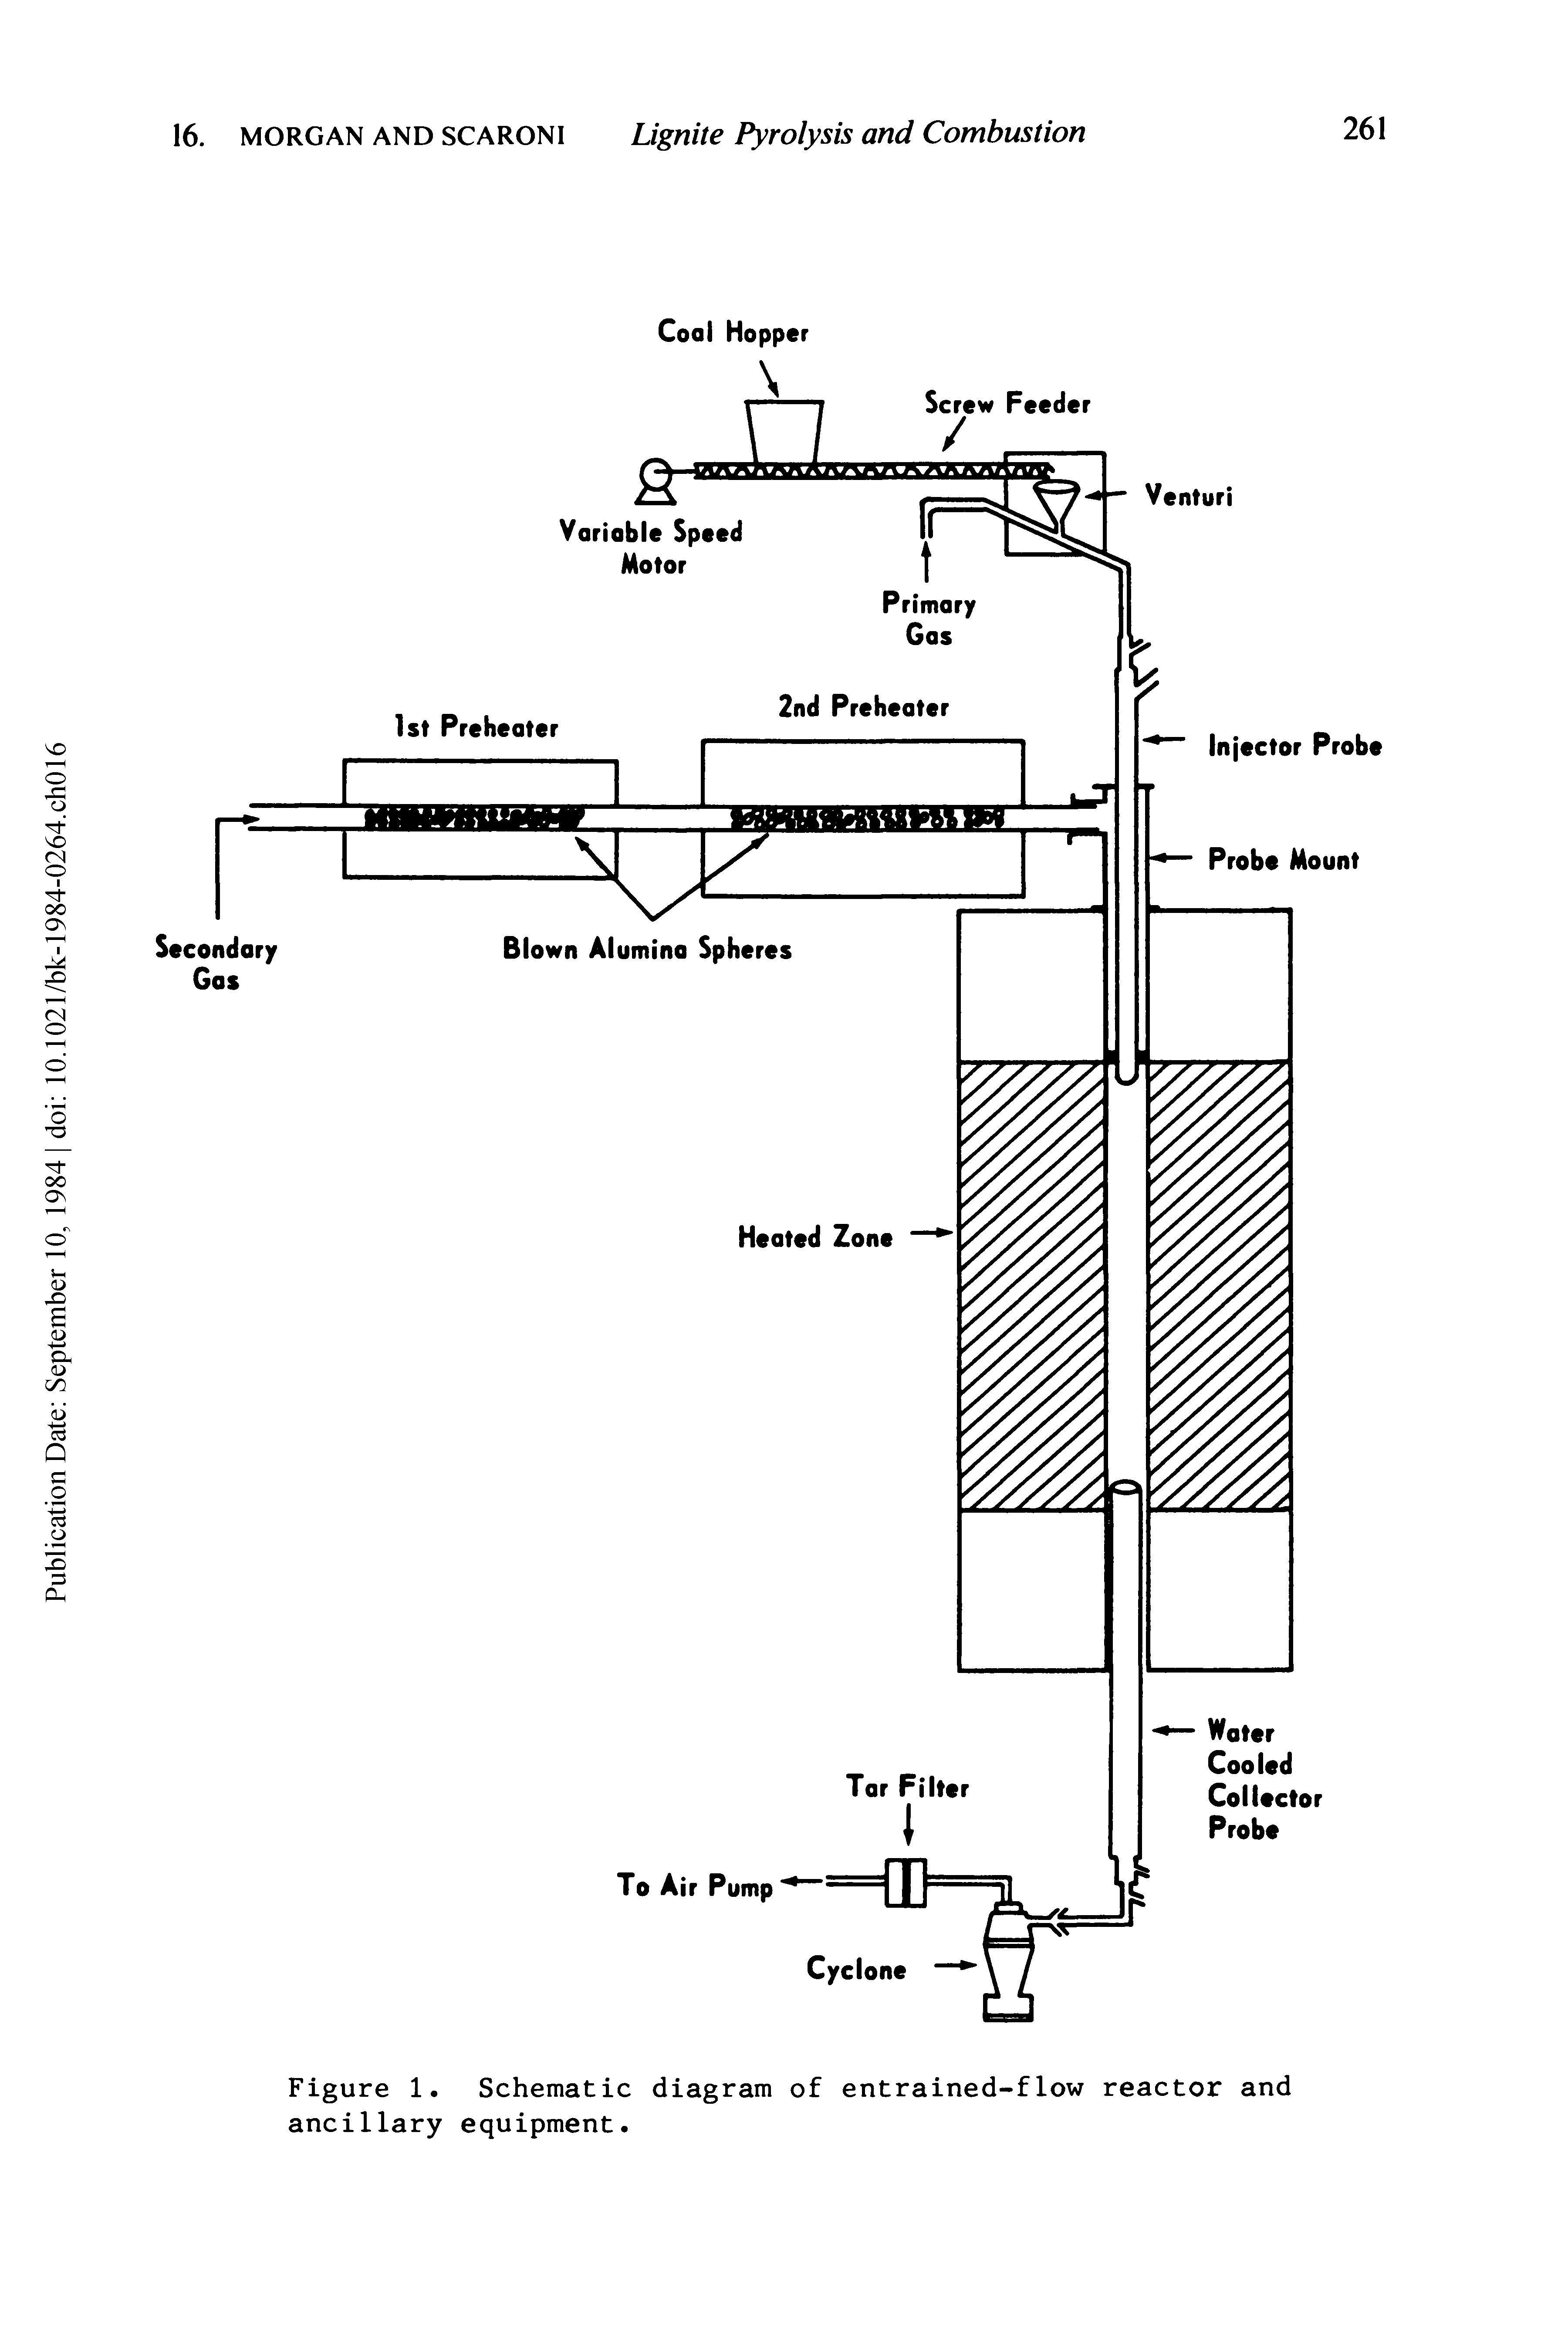 Figure 1. Schematic diagram of entrained-flow reactor and ancillary equipment.